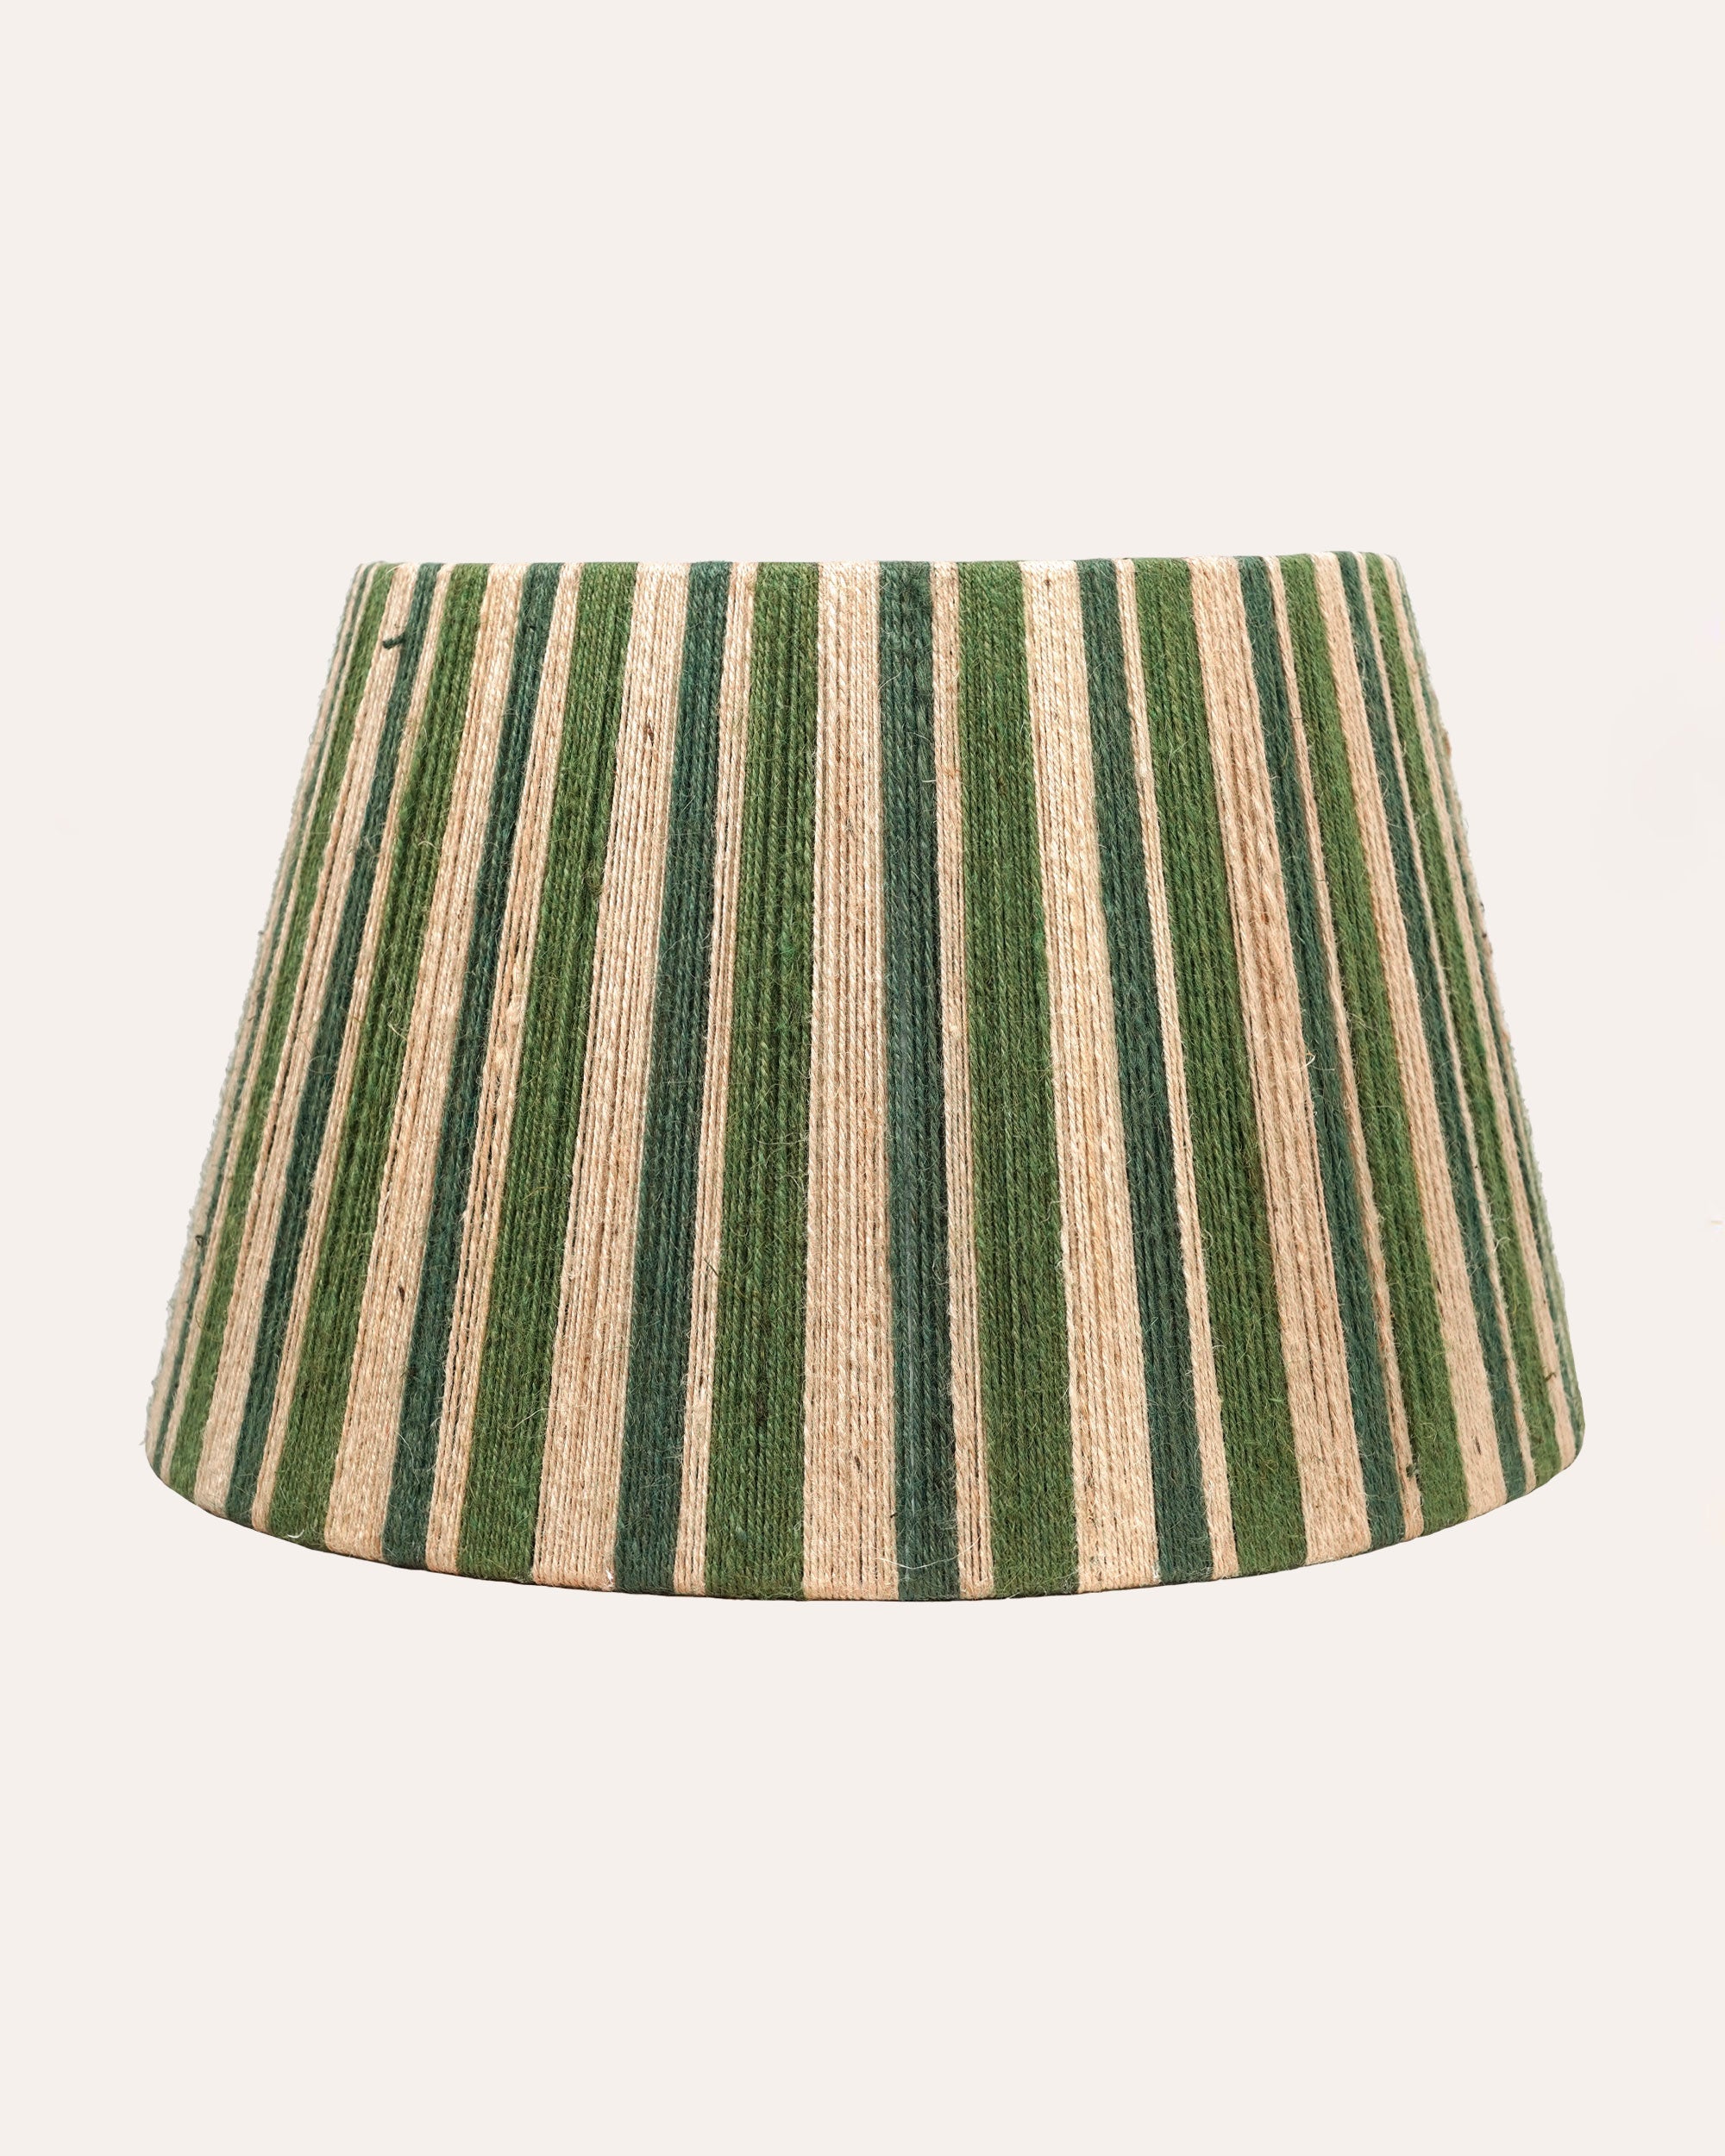 The Stripey String Lampshade - The Green